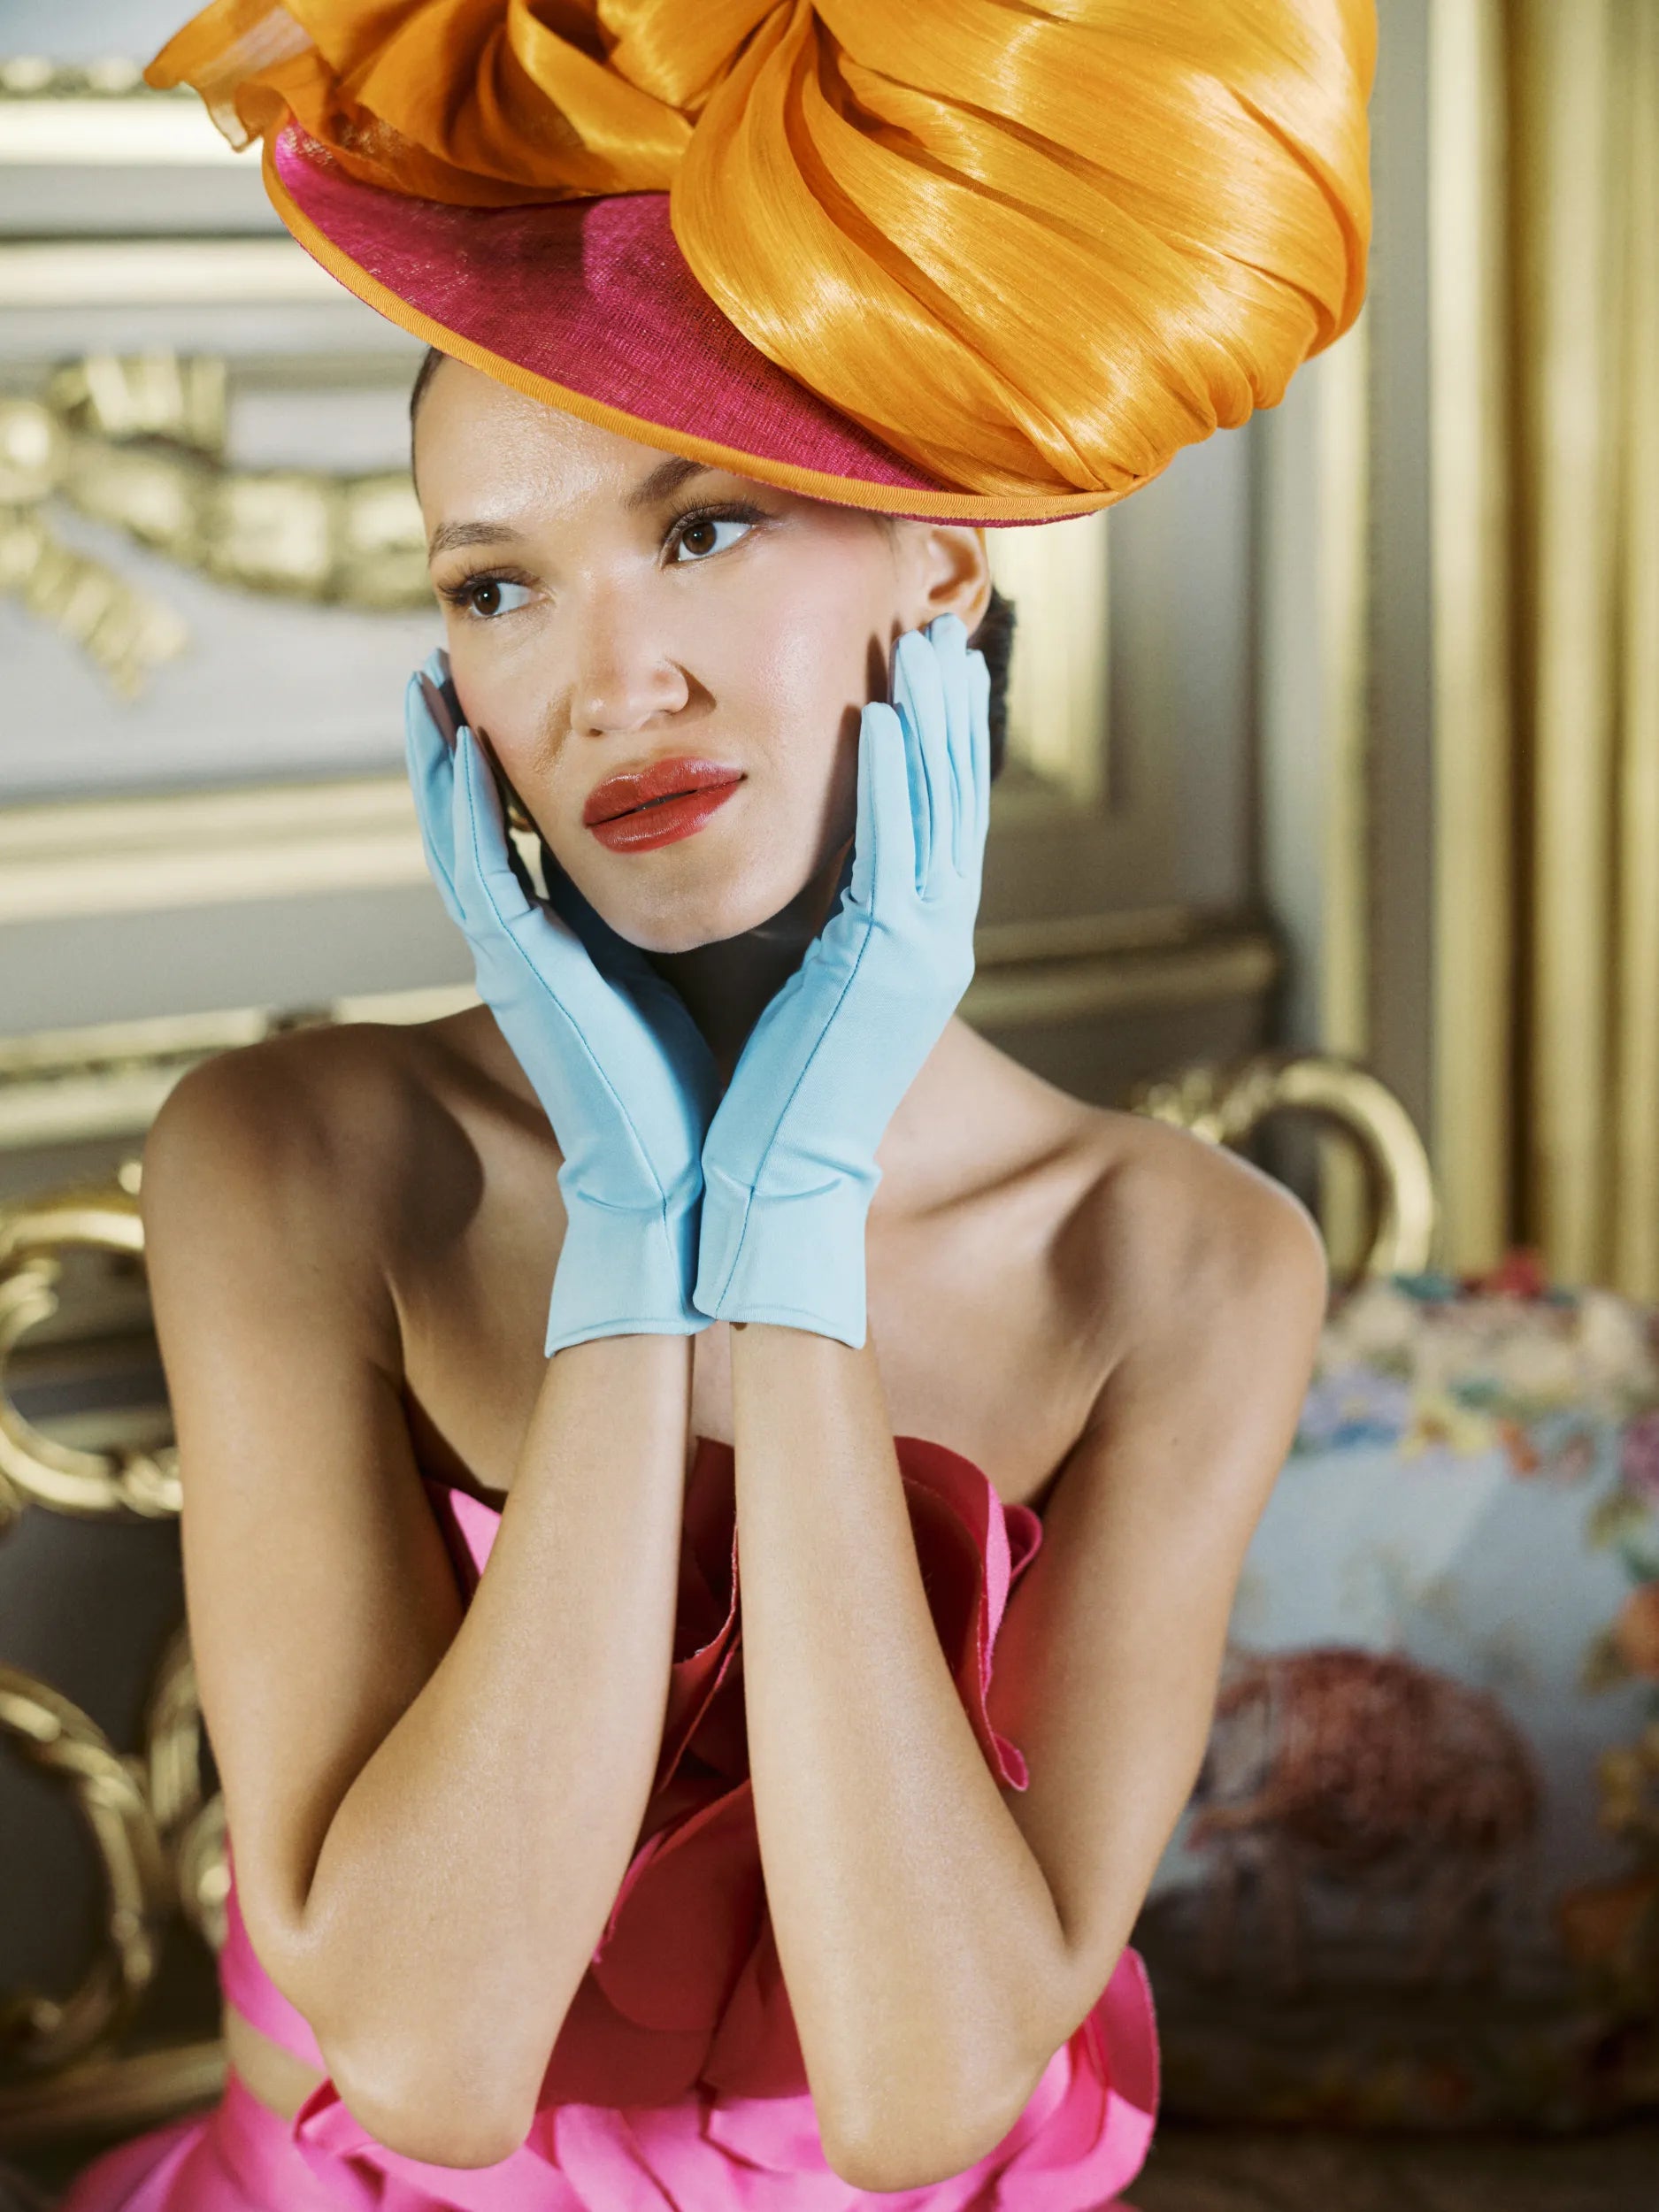 Woman at high tea wearing light blue gloves with hands elegantly on her face.